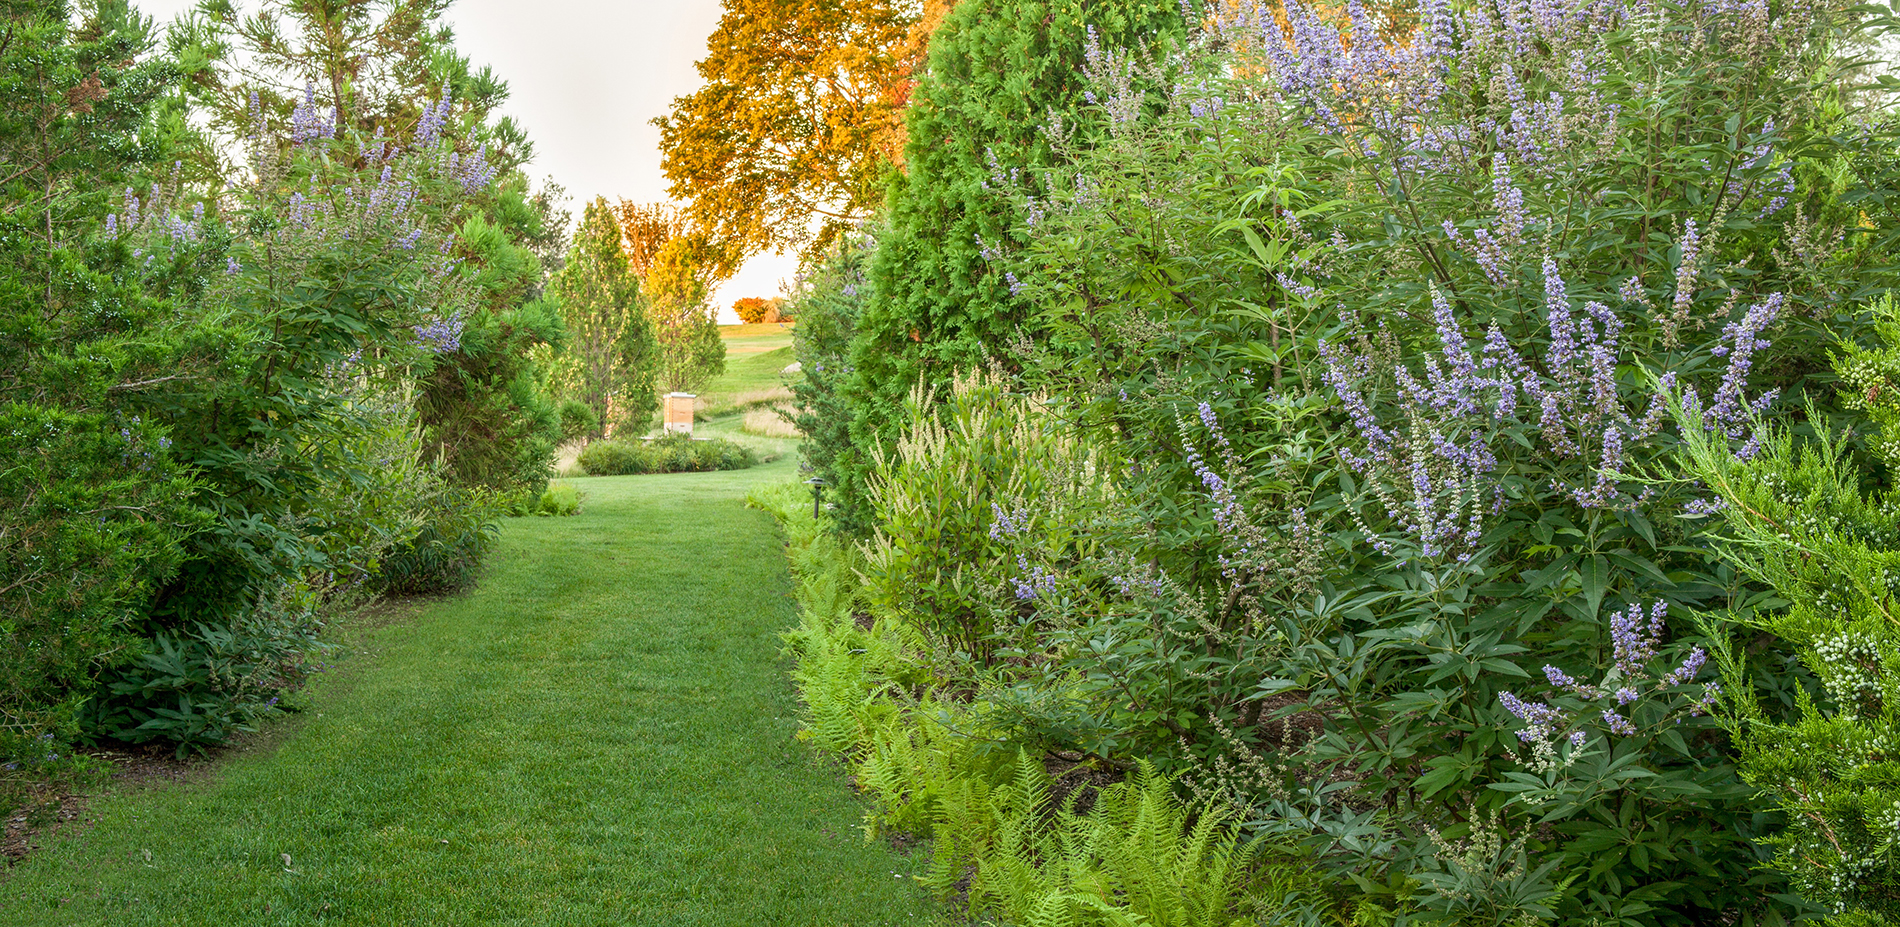 Around the garden, a network of mown paths meander through mixed evergreen trees and grassland, with hints of the blue-flowering perennials and occasi…